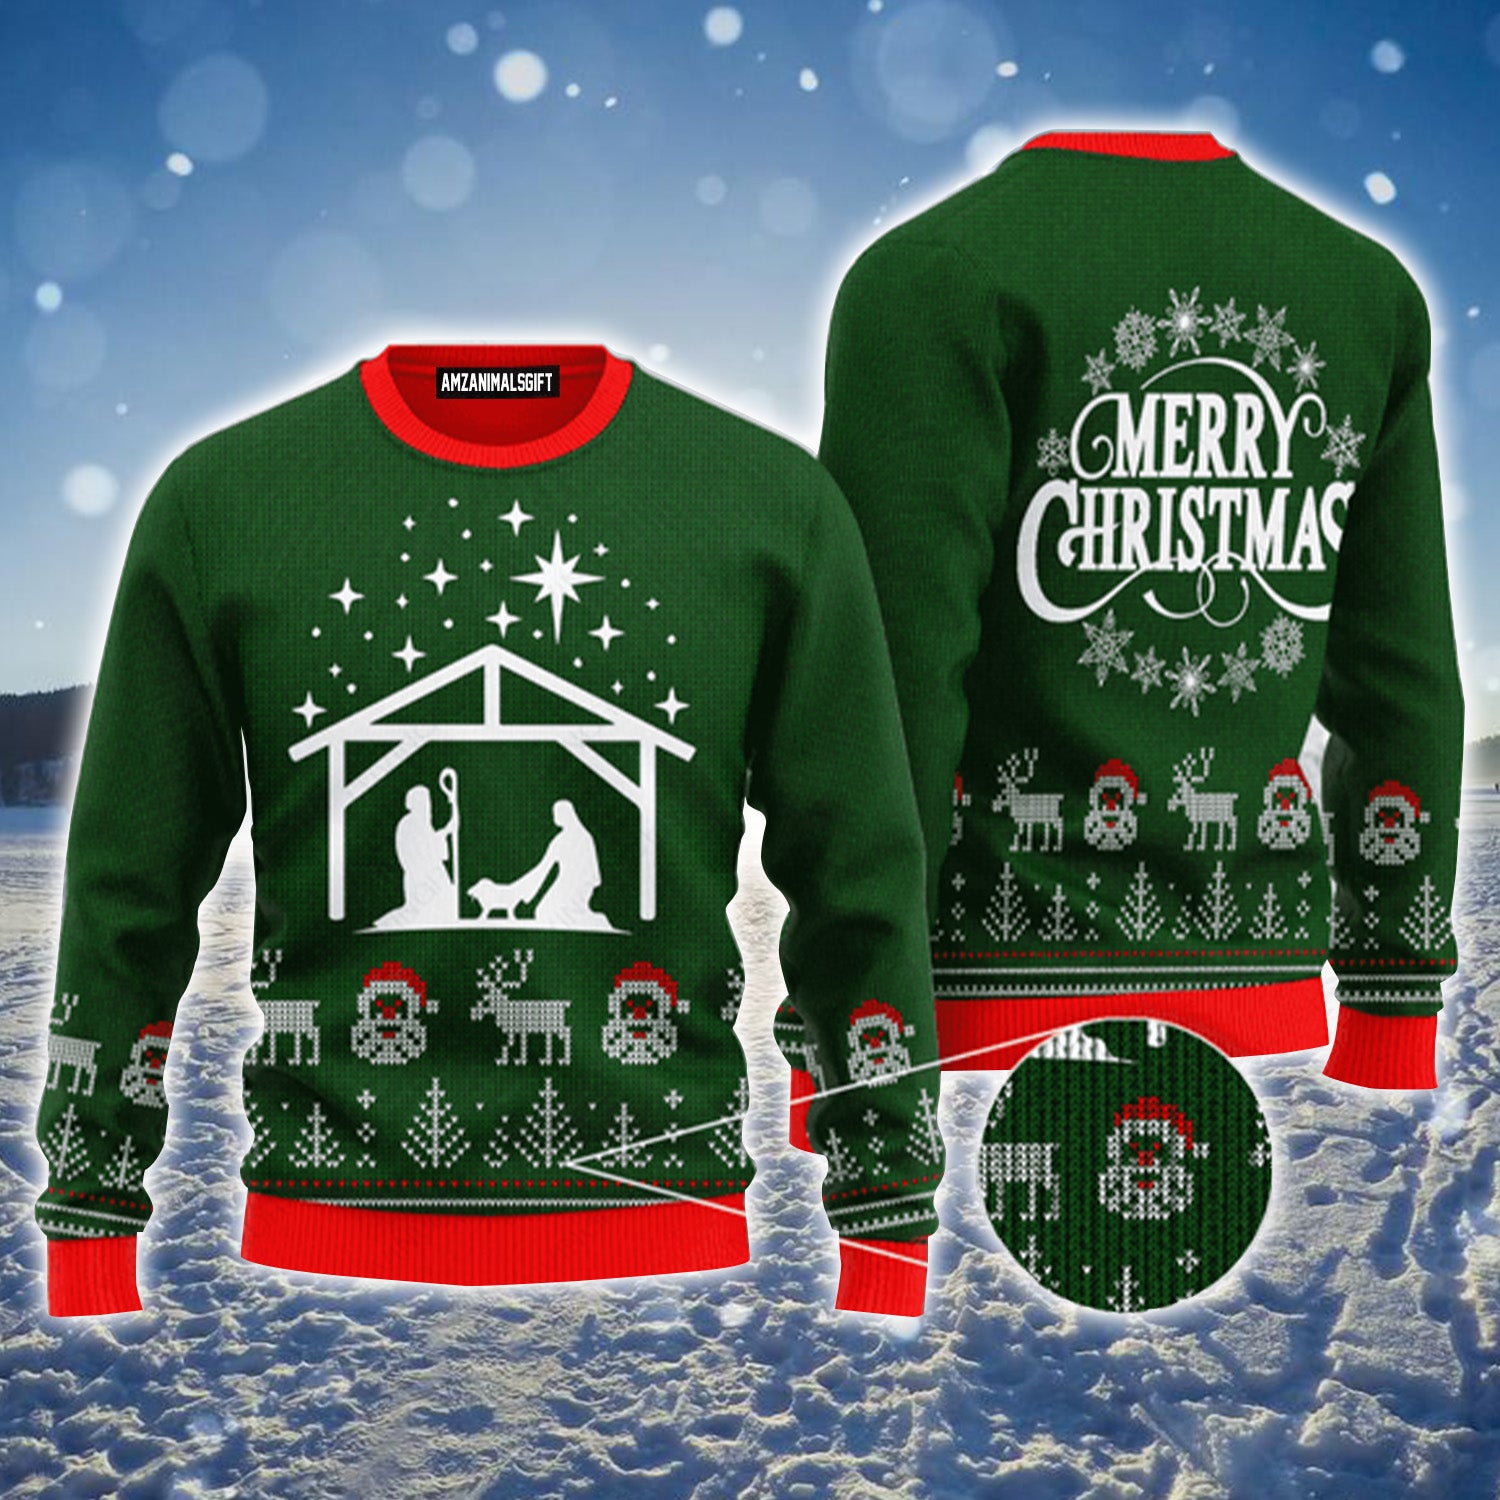 Merry Christmas Santa Reindeer Urly Sweater, Christmas Sweater For Men & Women - Perfect Gift For Christmas, New Year, Winter